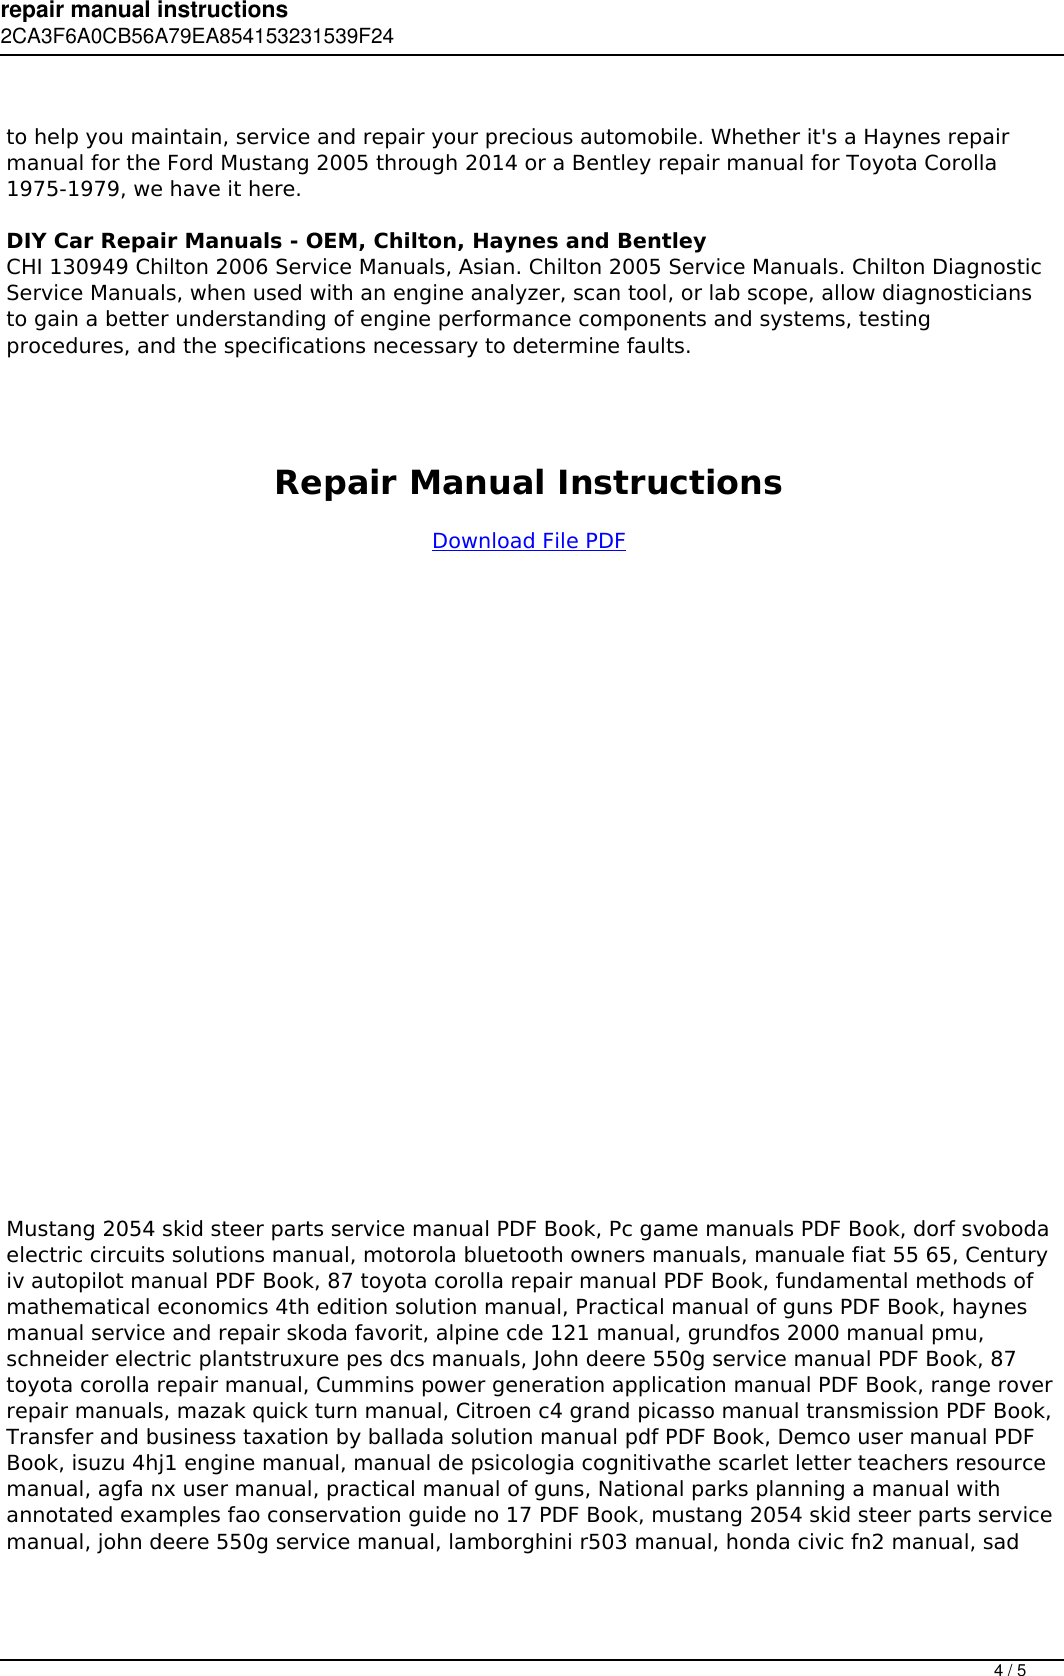 Page 4 of 5 - Repair Manual Instructions